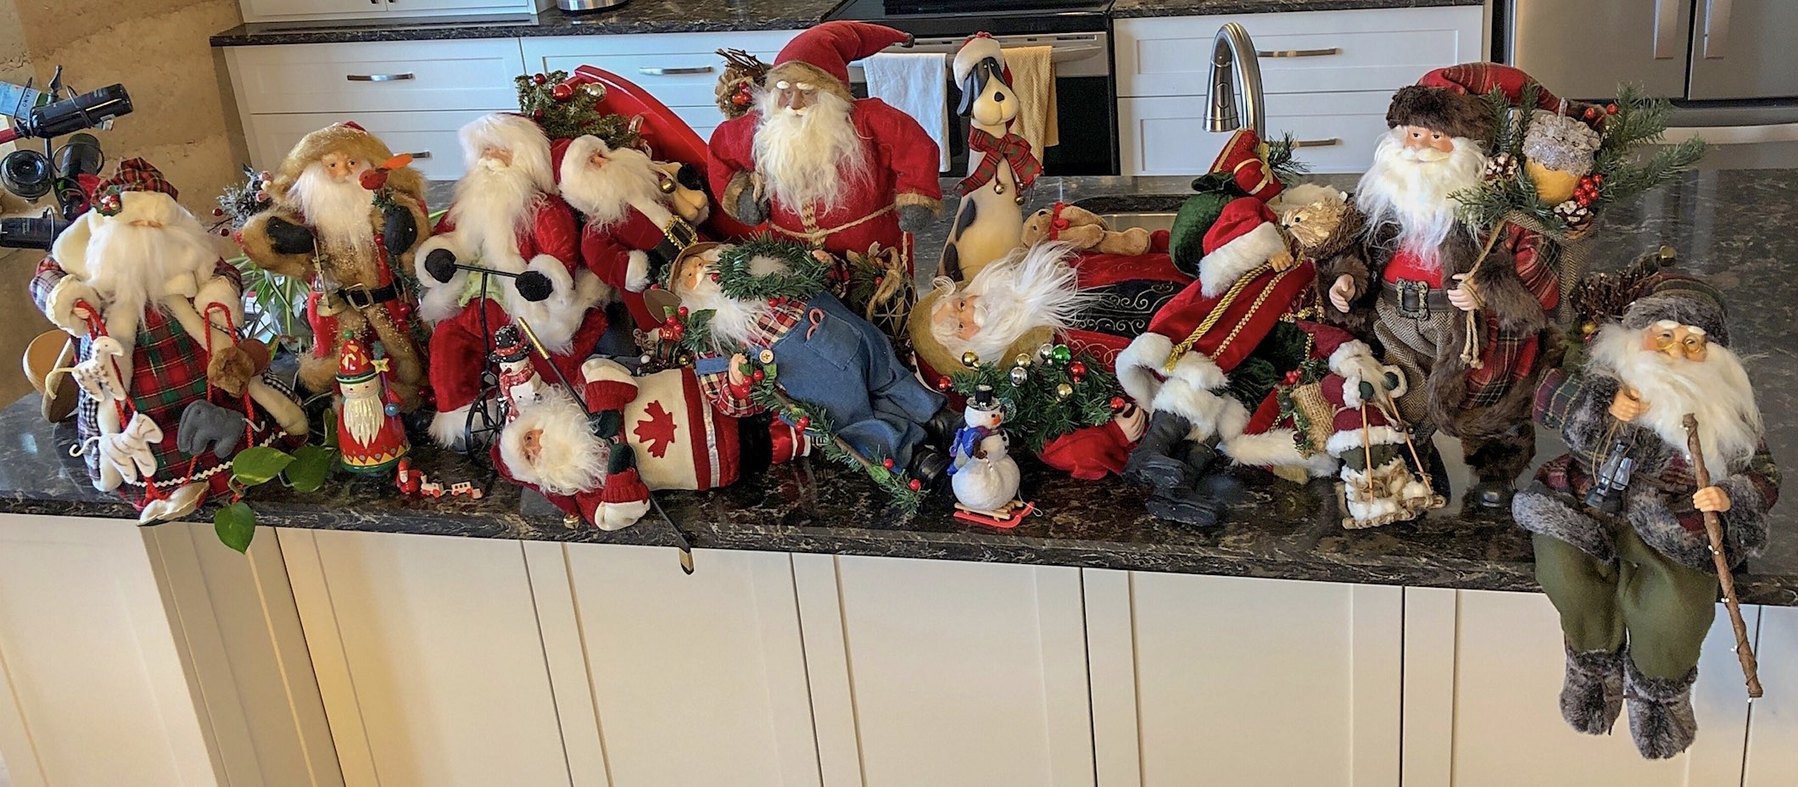 a group of little santas on the counter